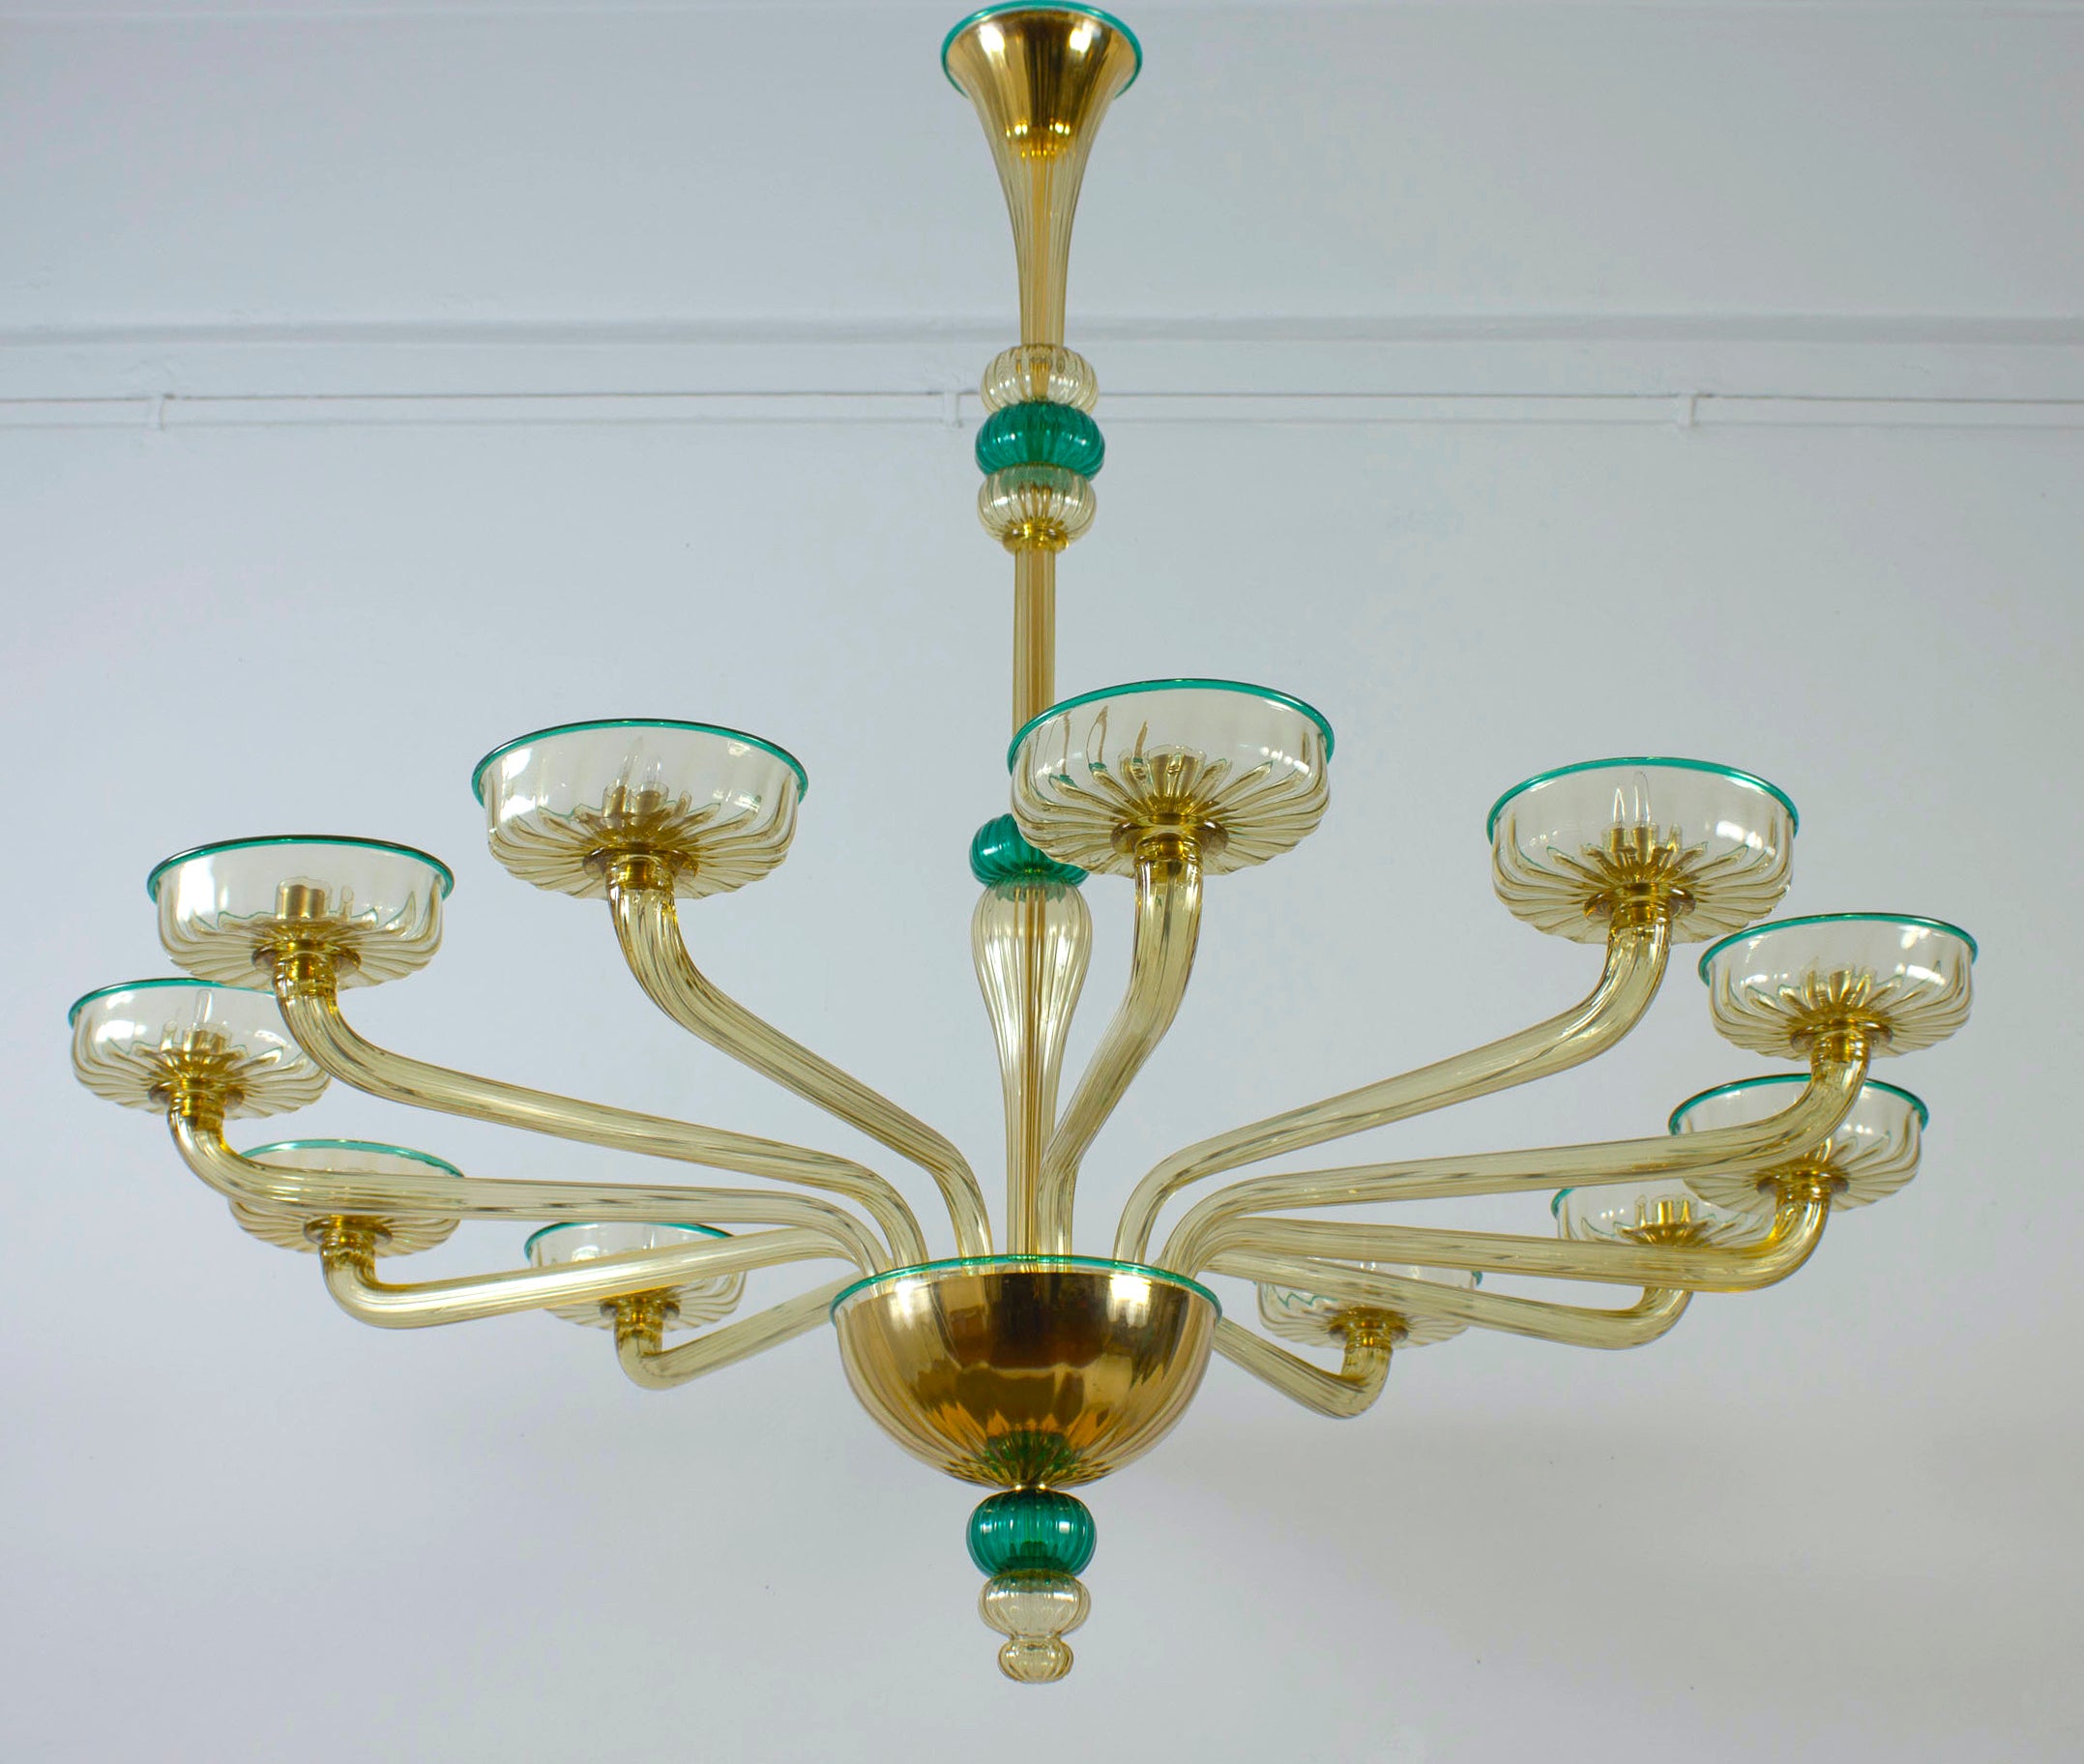 This magnificent amber color  chandelier  features 12 arms with emerald color finishes. 

Cleaned and re-wired, in full working order and ready to use. In excellent vintage condition. The  glasses, all original and in good condition, are without